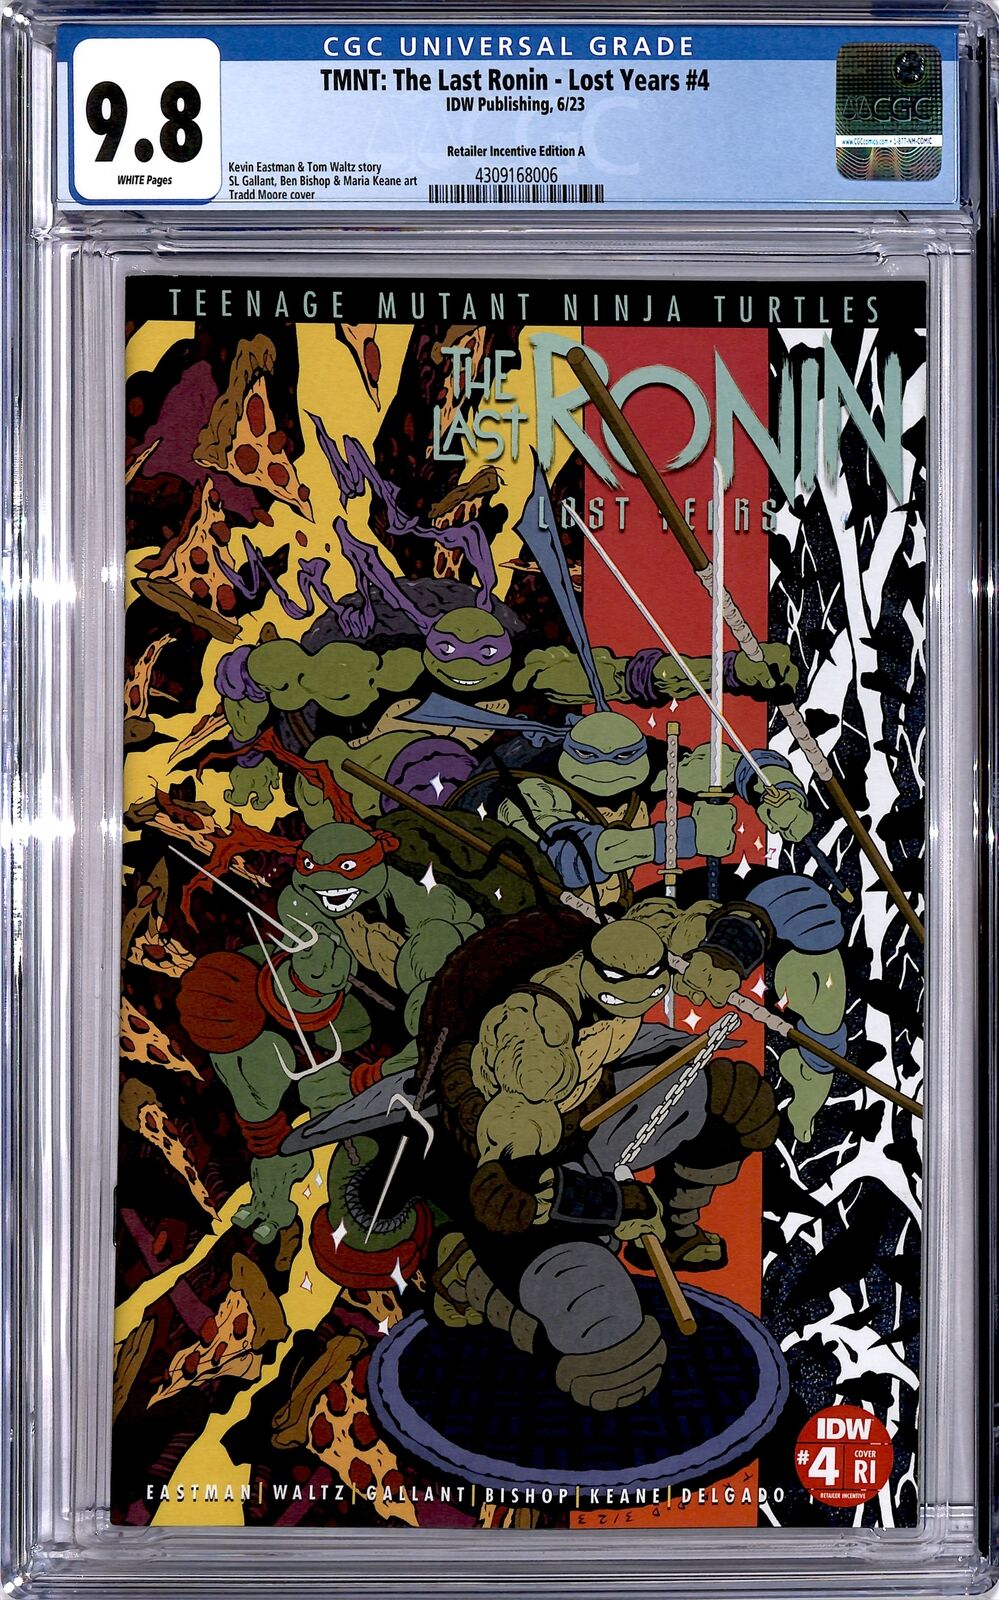 2023-24 TMNT: The Last Ronin - Lost Years Retailer Incentive A CGC 9.8 #4